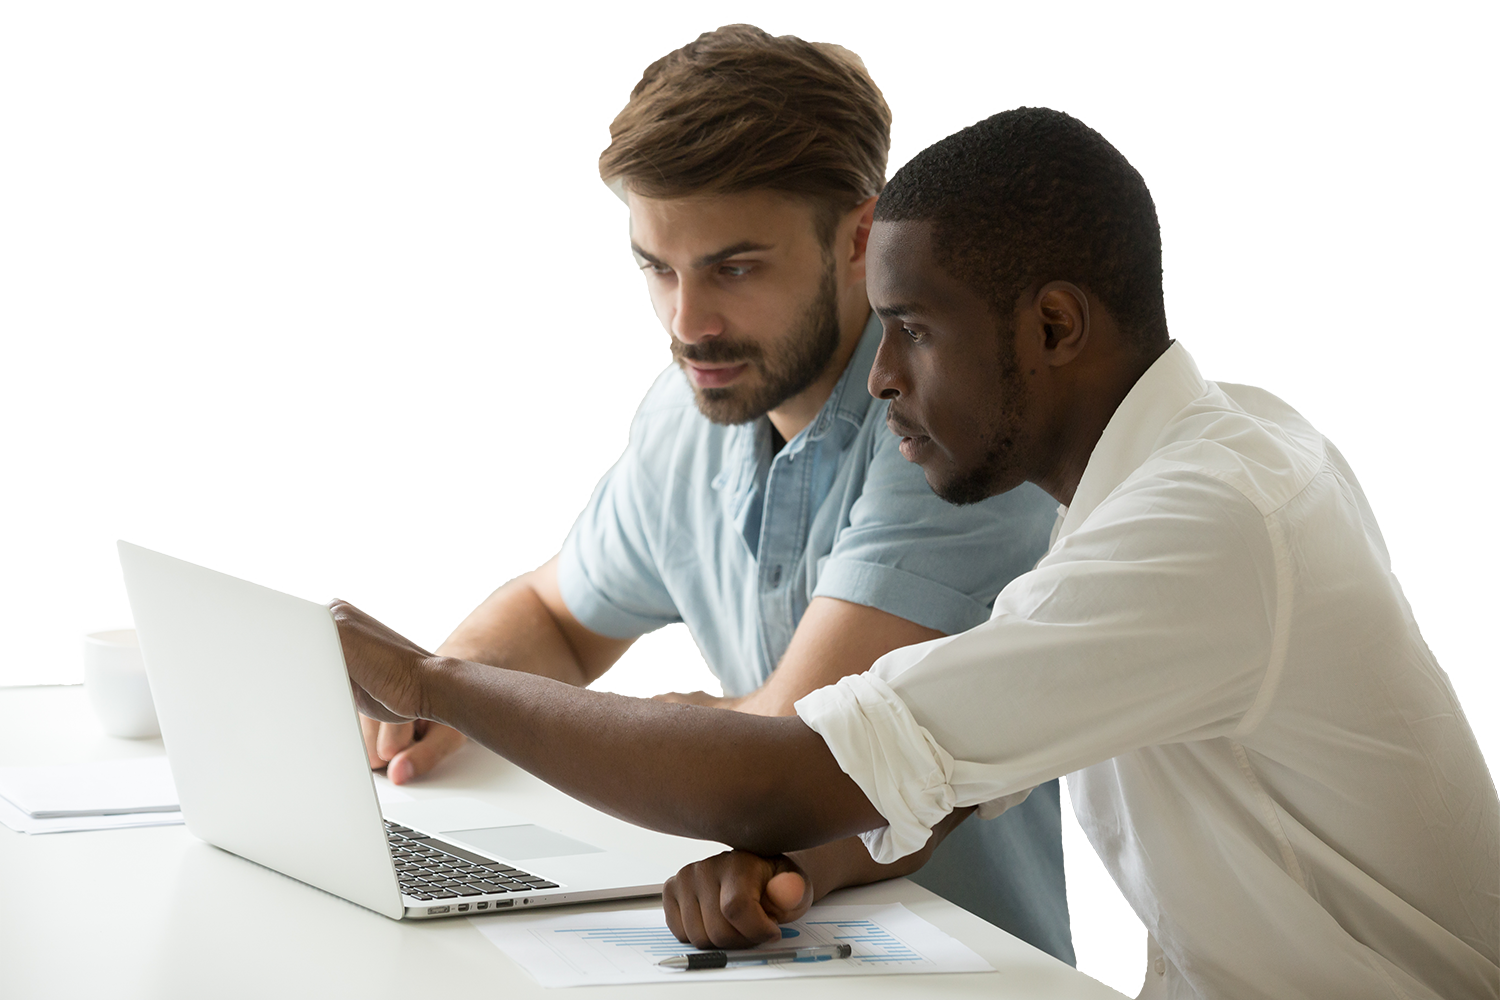 Two young men looking at laptop